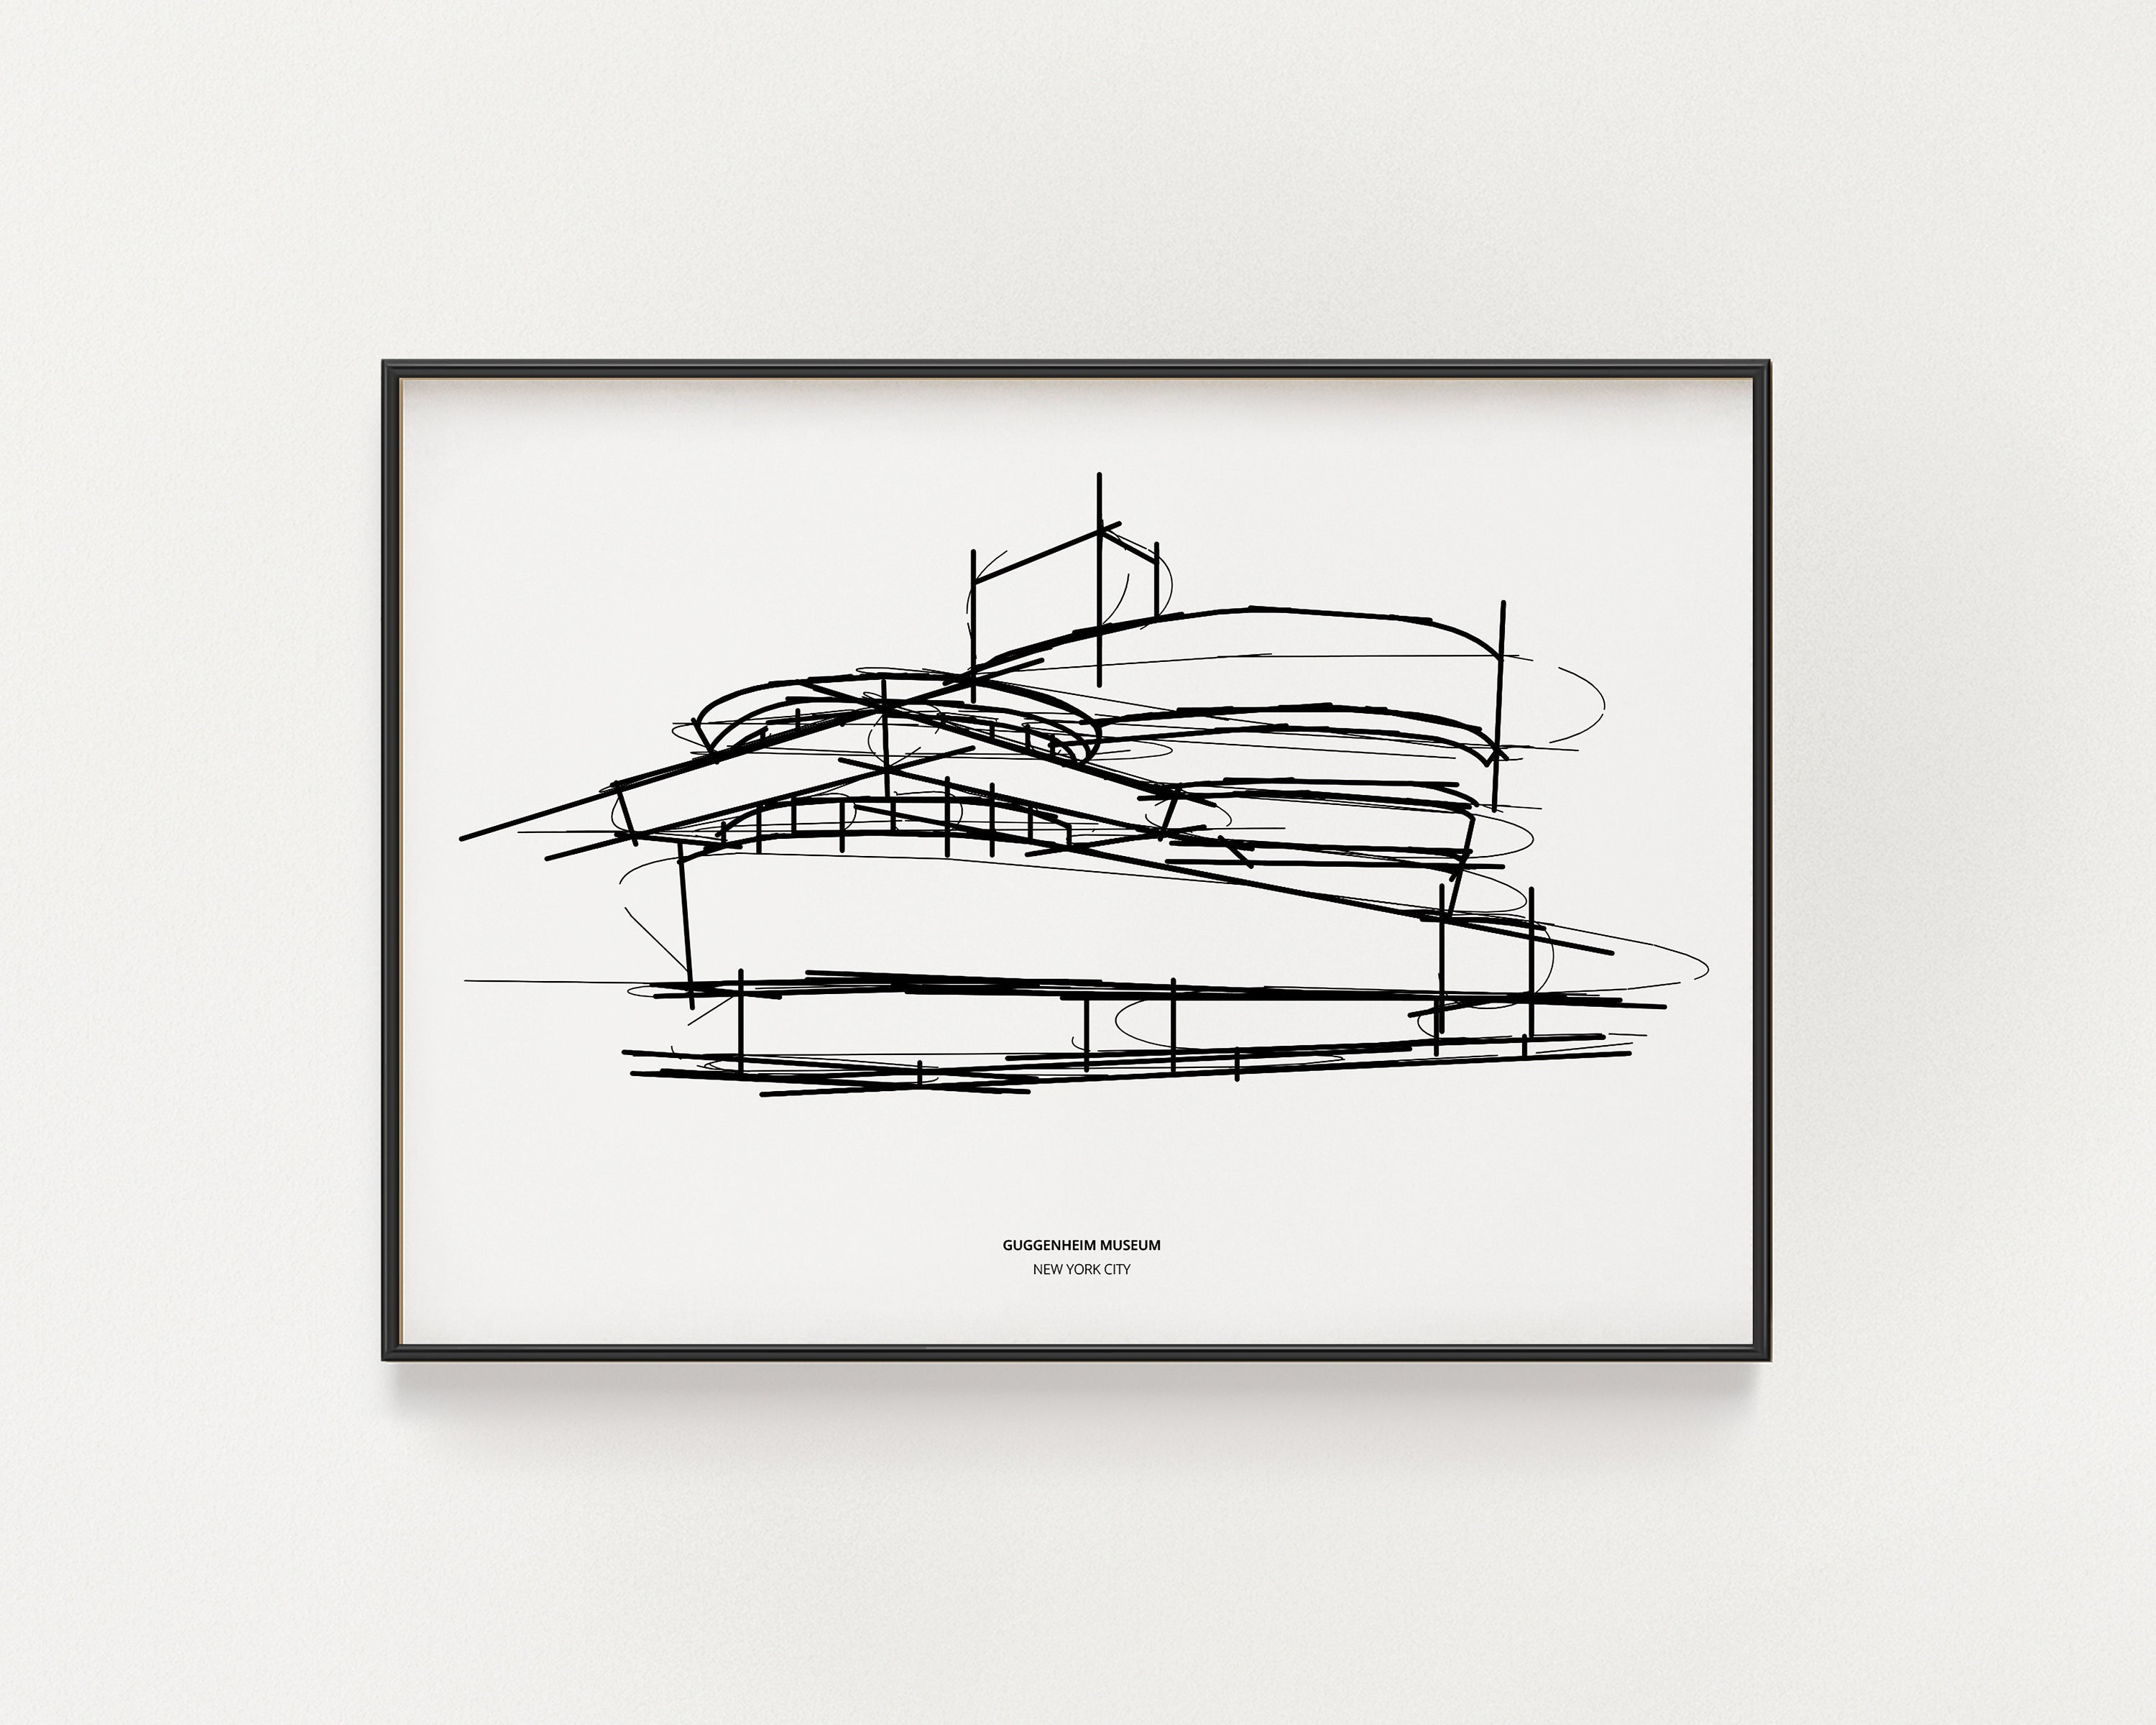 Architectural drawing courses  Guggenheim museum manual   Facebook